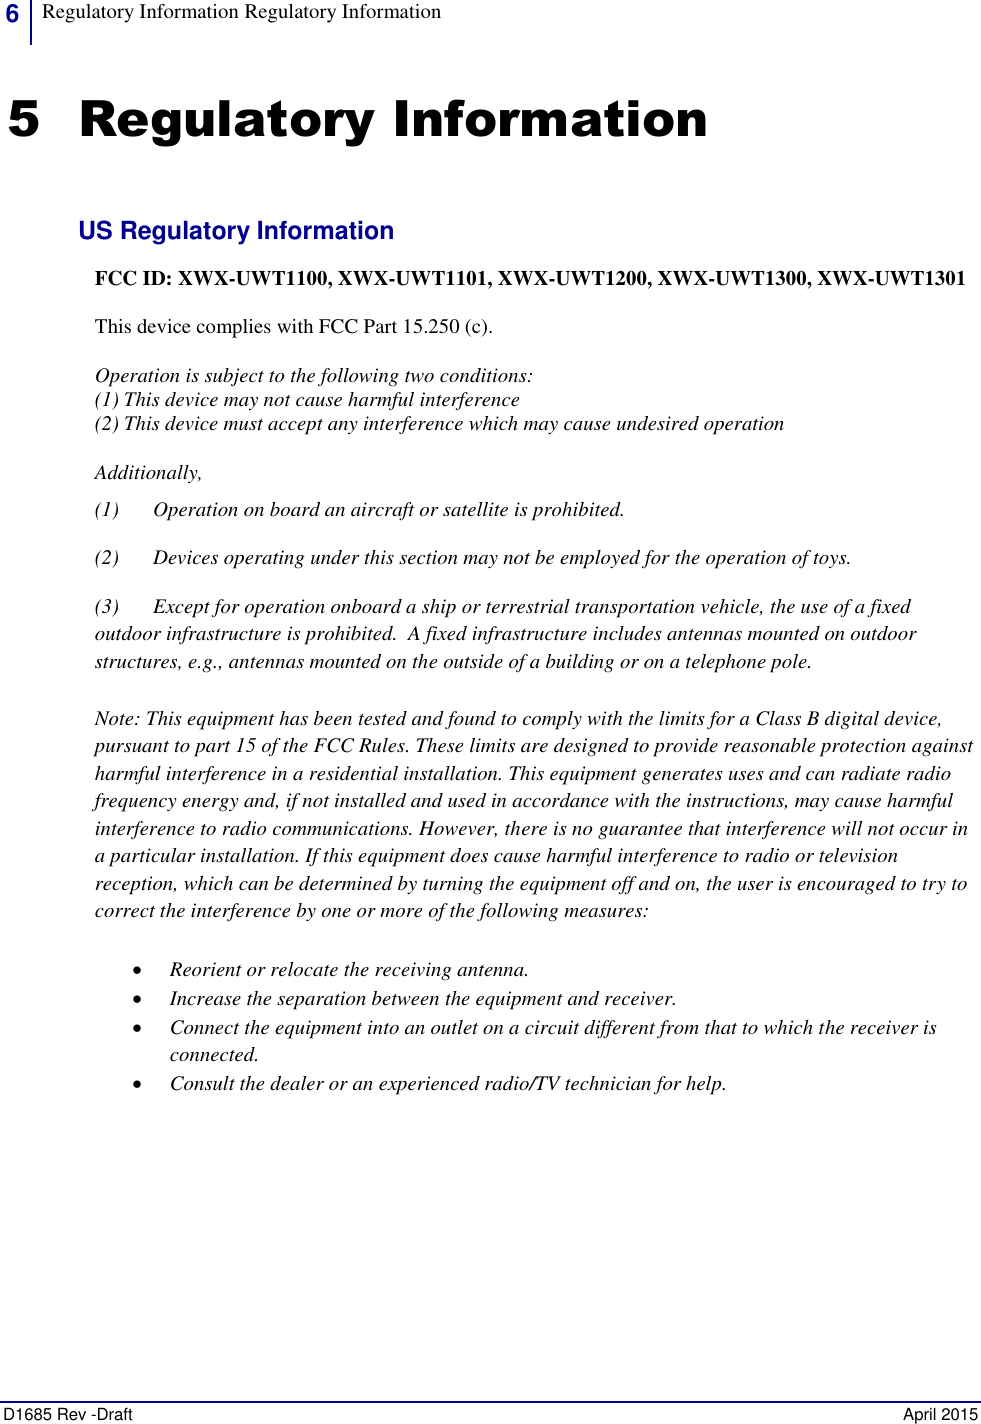 6 Regulatory Information Regulatory Information    D1685 Rev -Draft    April 2015 5 Regulatory Information US Regulatory Information FCC ID: XWX-UWT1100, XWX-UWT1101, XWX-UWT1200, XWX-UWT1300, XWX-UWT1301 This device complies with FCC Part 15.250 (c).  Operation is subject to the following two conditions:  (1) This device may not cause harmful interference  (2) This device must accept any interference which may cause undesired operation Additionally,  (1) Operation on board an aircraft or satellite is prohibited. (2) Devices operating under this section may not be employed for the operation of toys. (3) Except for operation onboard a ship or terrestrial transportation vehicle, the use of a fixed outdoor infrastructure is prohibited.  A fixed infrastructure includes antennas mounted on outdoor structures, e.g., antennas mounted on the outside of a building or on a telephone pole. Note: This equipment has been tested and found to comply with the limits for a Class B digital device, pursuant to part 15 of the FCC Rules. These limits are designed to provide reasonable protection against harmful interference in a residential installation. This equipment generates uses and can radiate radio frequency energy and, if not installed and used in accordance with the instructions, may cause harmful interference to radio communications. However, there is no guarantee that interference will not occur in a particular installation. If this equipment does cause harmful interference to radio or television reception, which can be determined by turning the equipment off and on, the user is encouraged to try to correct the interference by one or more of the following measures:  Reorient or relocate the receiving antenna.  Increase the separation between the equipment and receiver.  Connect the equipment into an outlet on a circuit different from that to which the receiver is connected.  Consult the dealer or an experienced radio/TV technician for help.   